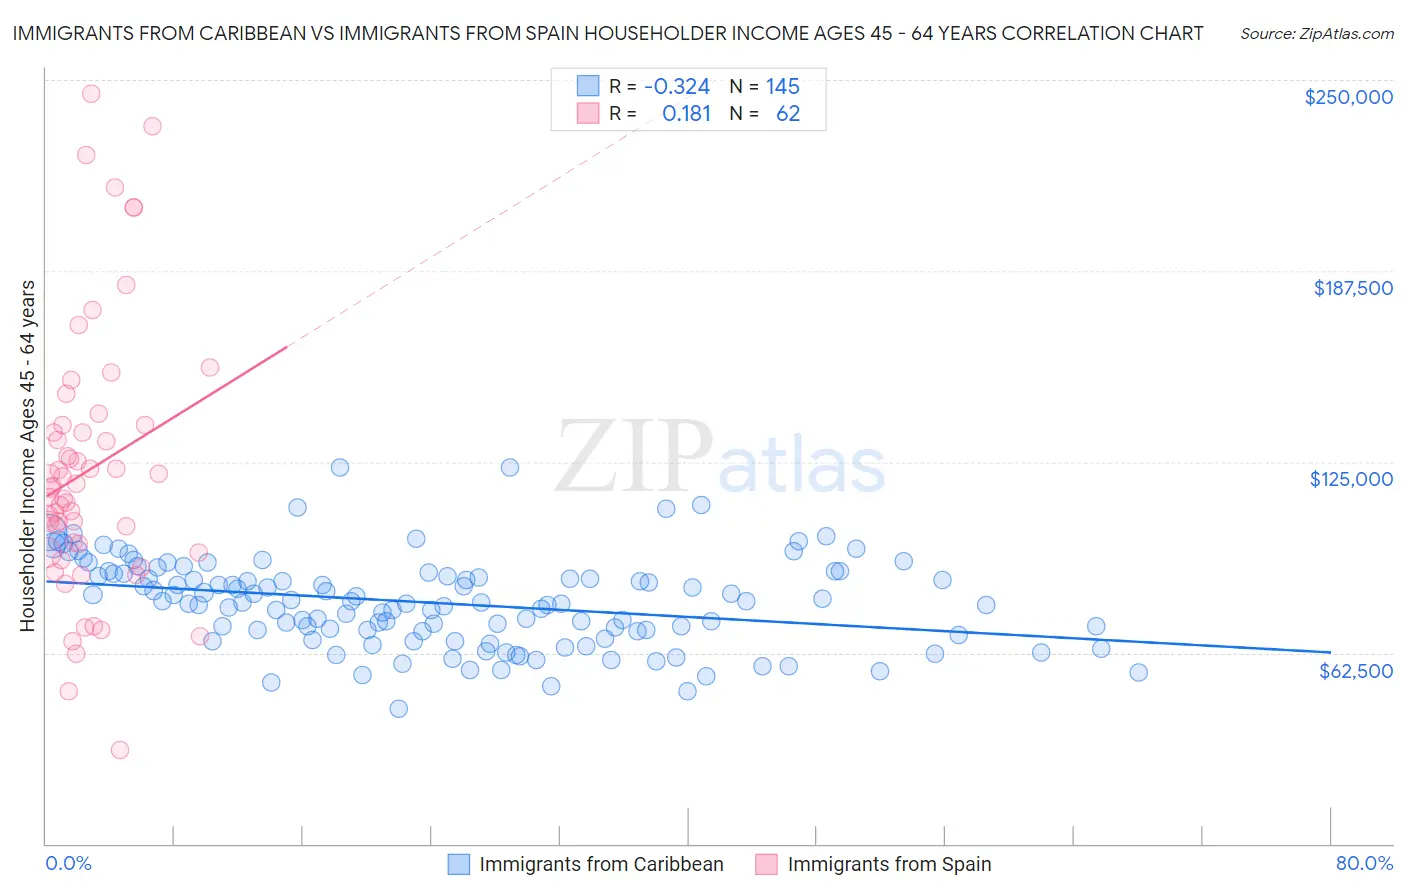 Immigrants from Caribbean vs Immigrants from Spain Householder Income Ages 45 - 64 years